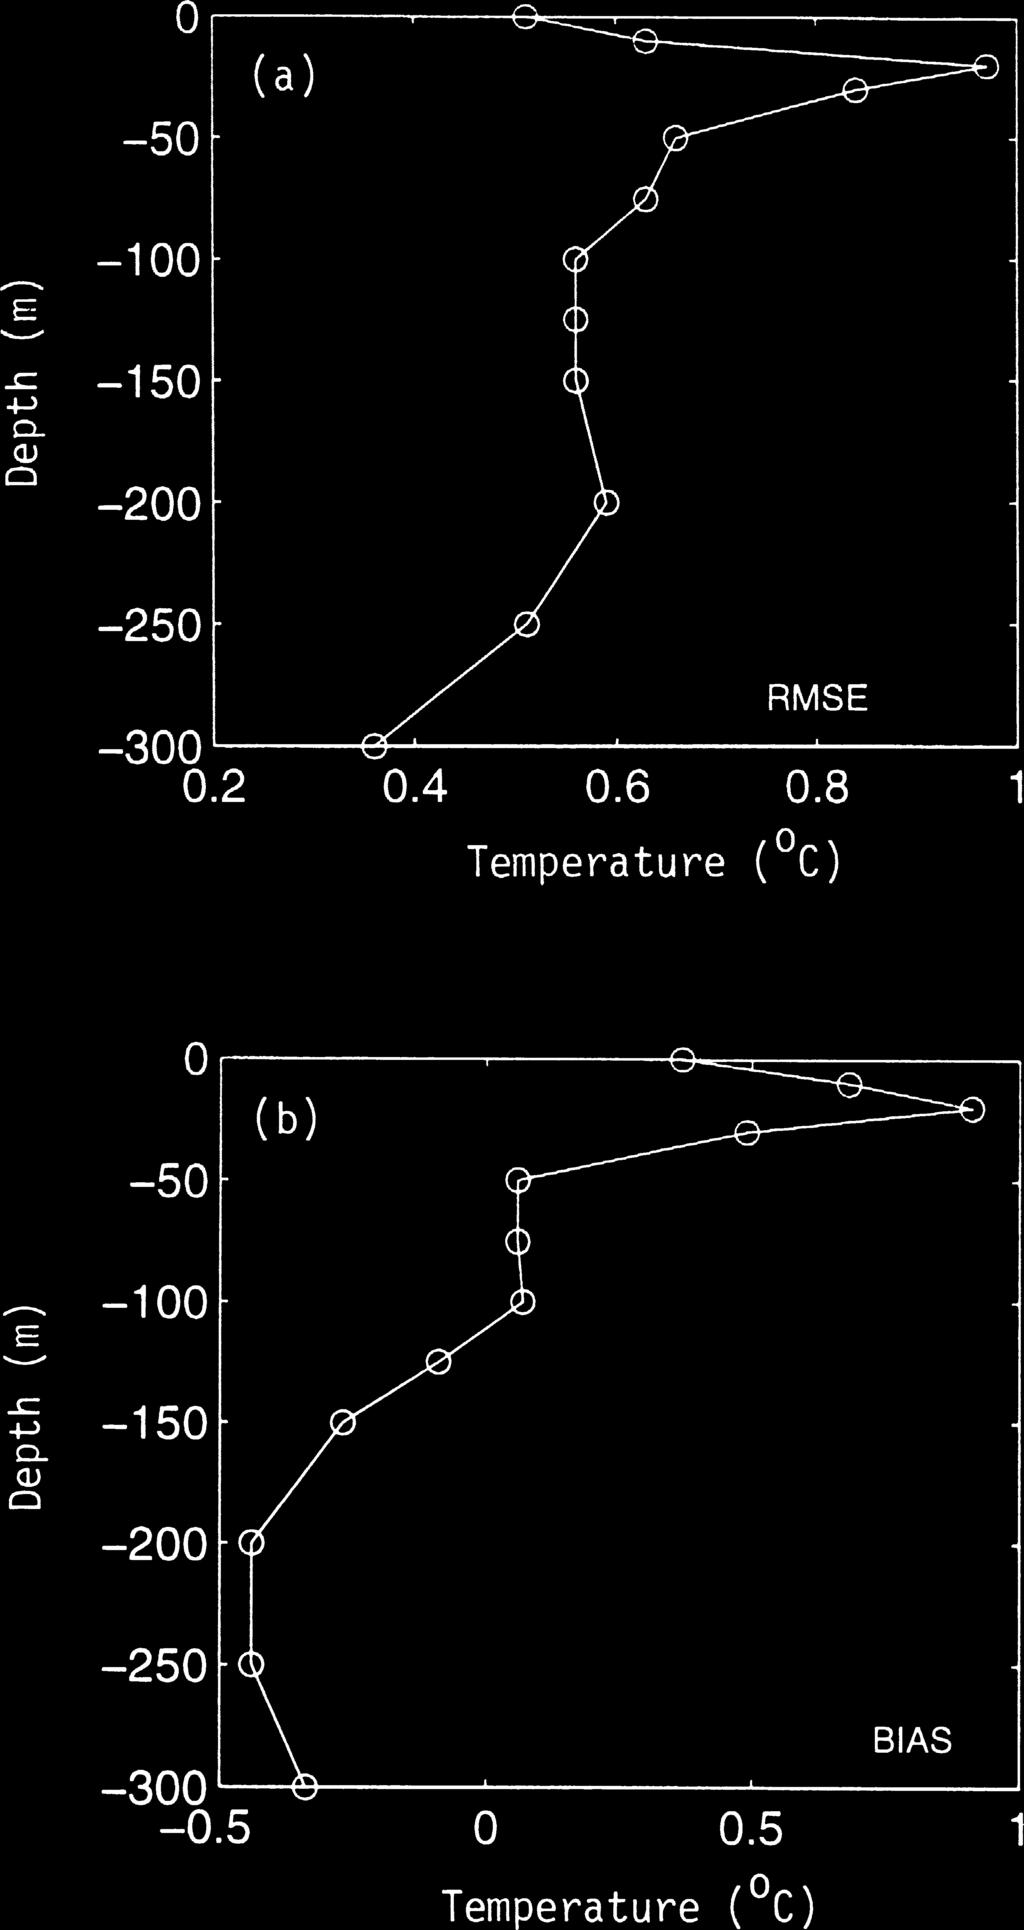 Fig. 11. Difference between CAOCS simulated and AXBT measured temperature fields: (a) RMSE, and (b) BIAS. 4.2 Velocity 4.2.1 Horizontal velocity fields The simulated horizontal velocity field (Fig.